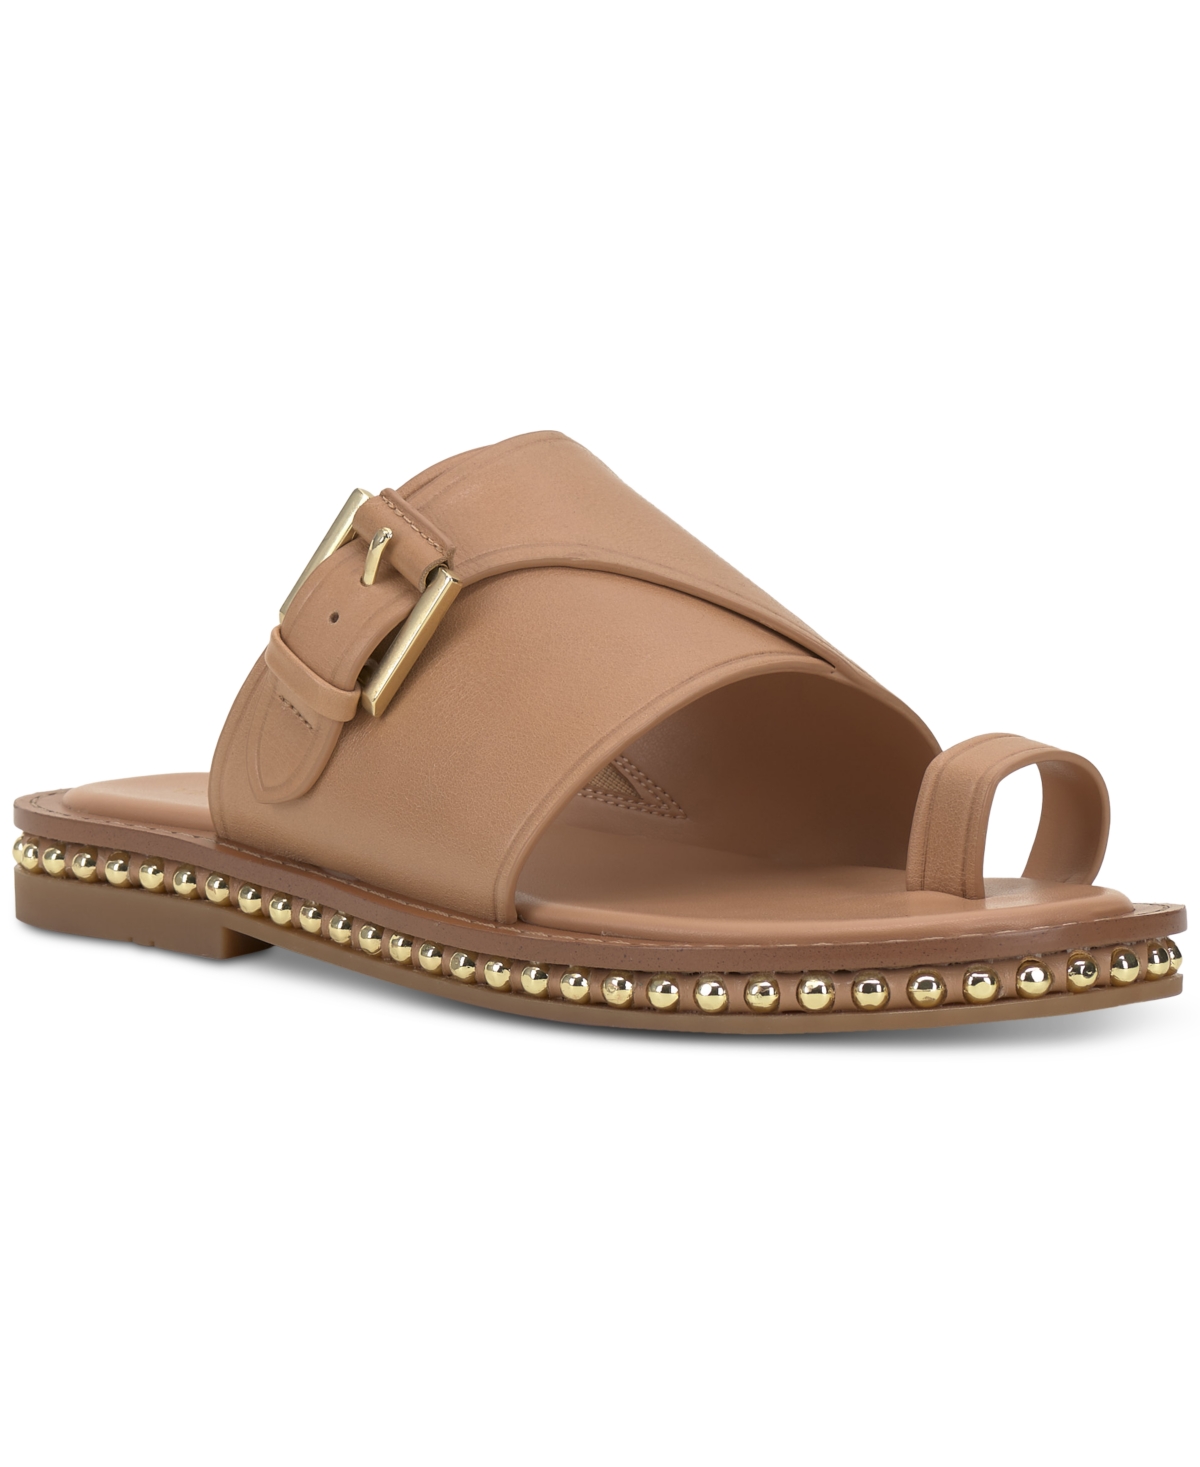 UPC 196672388666 product image for Vince Camuto Women's Cooliann Hooded Thong Flat Sandals Women's Shoes | upcitemdb.com